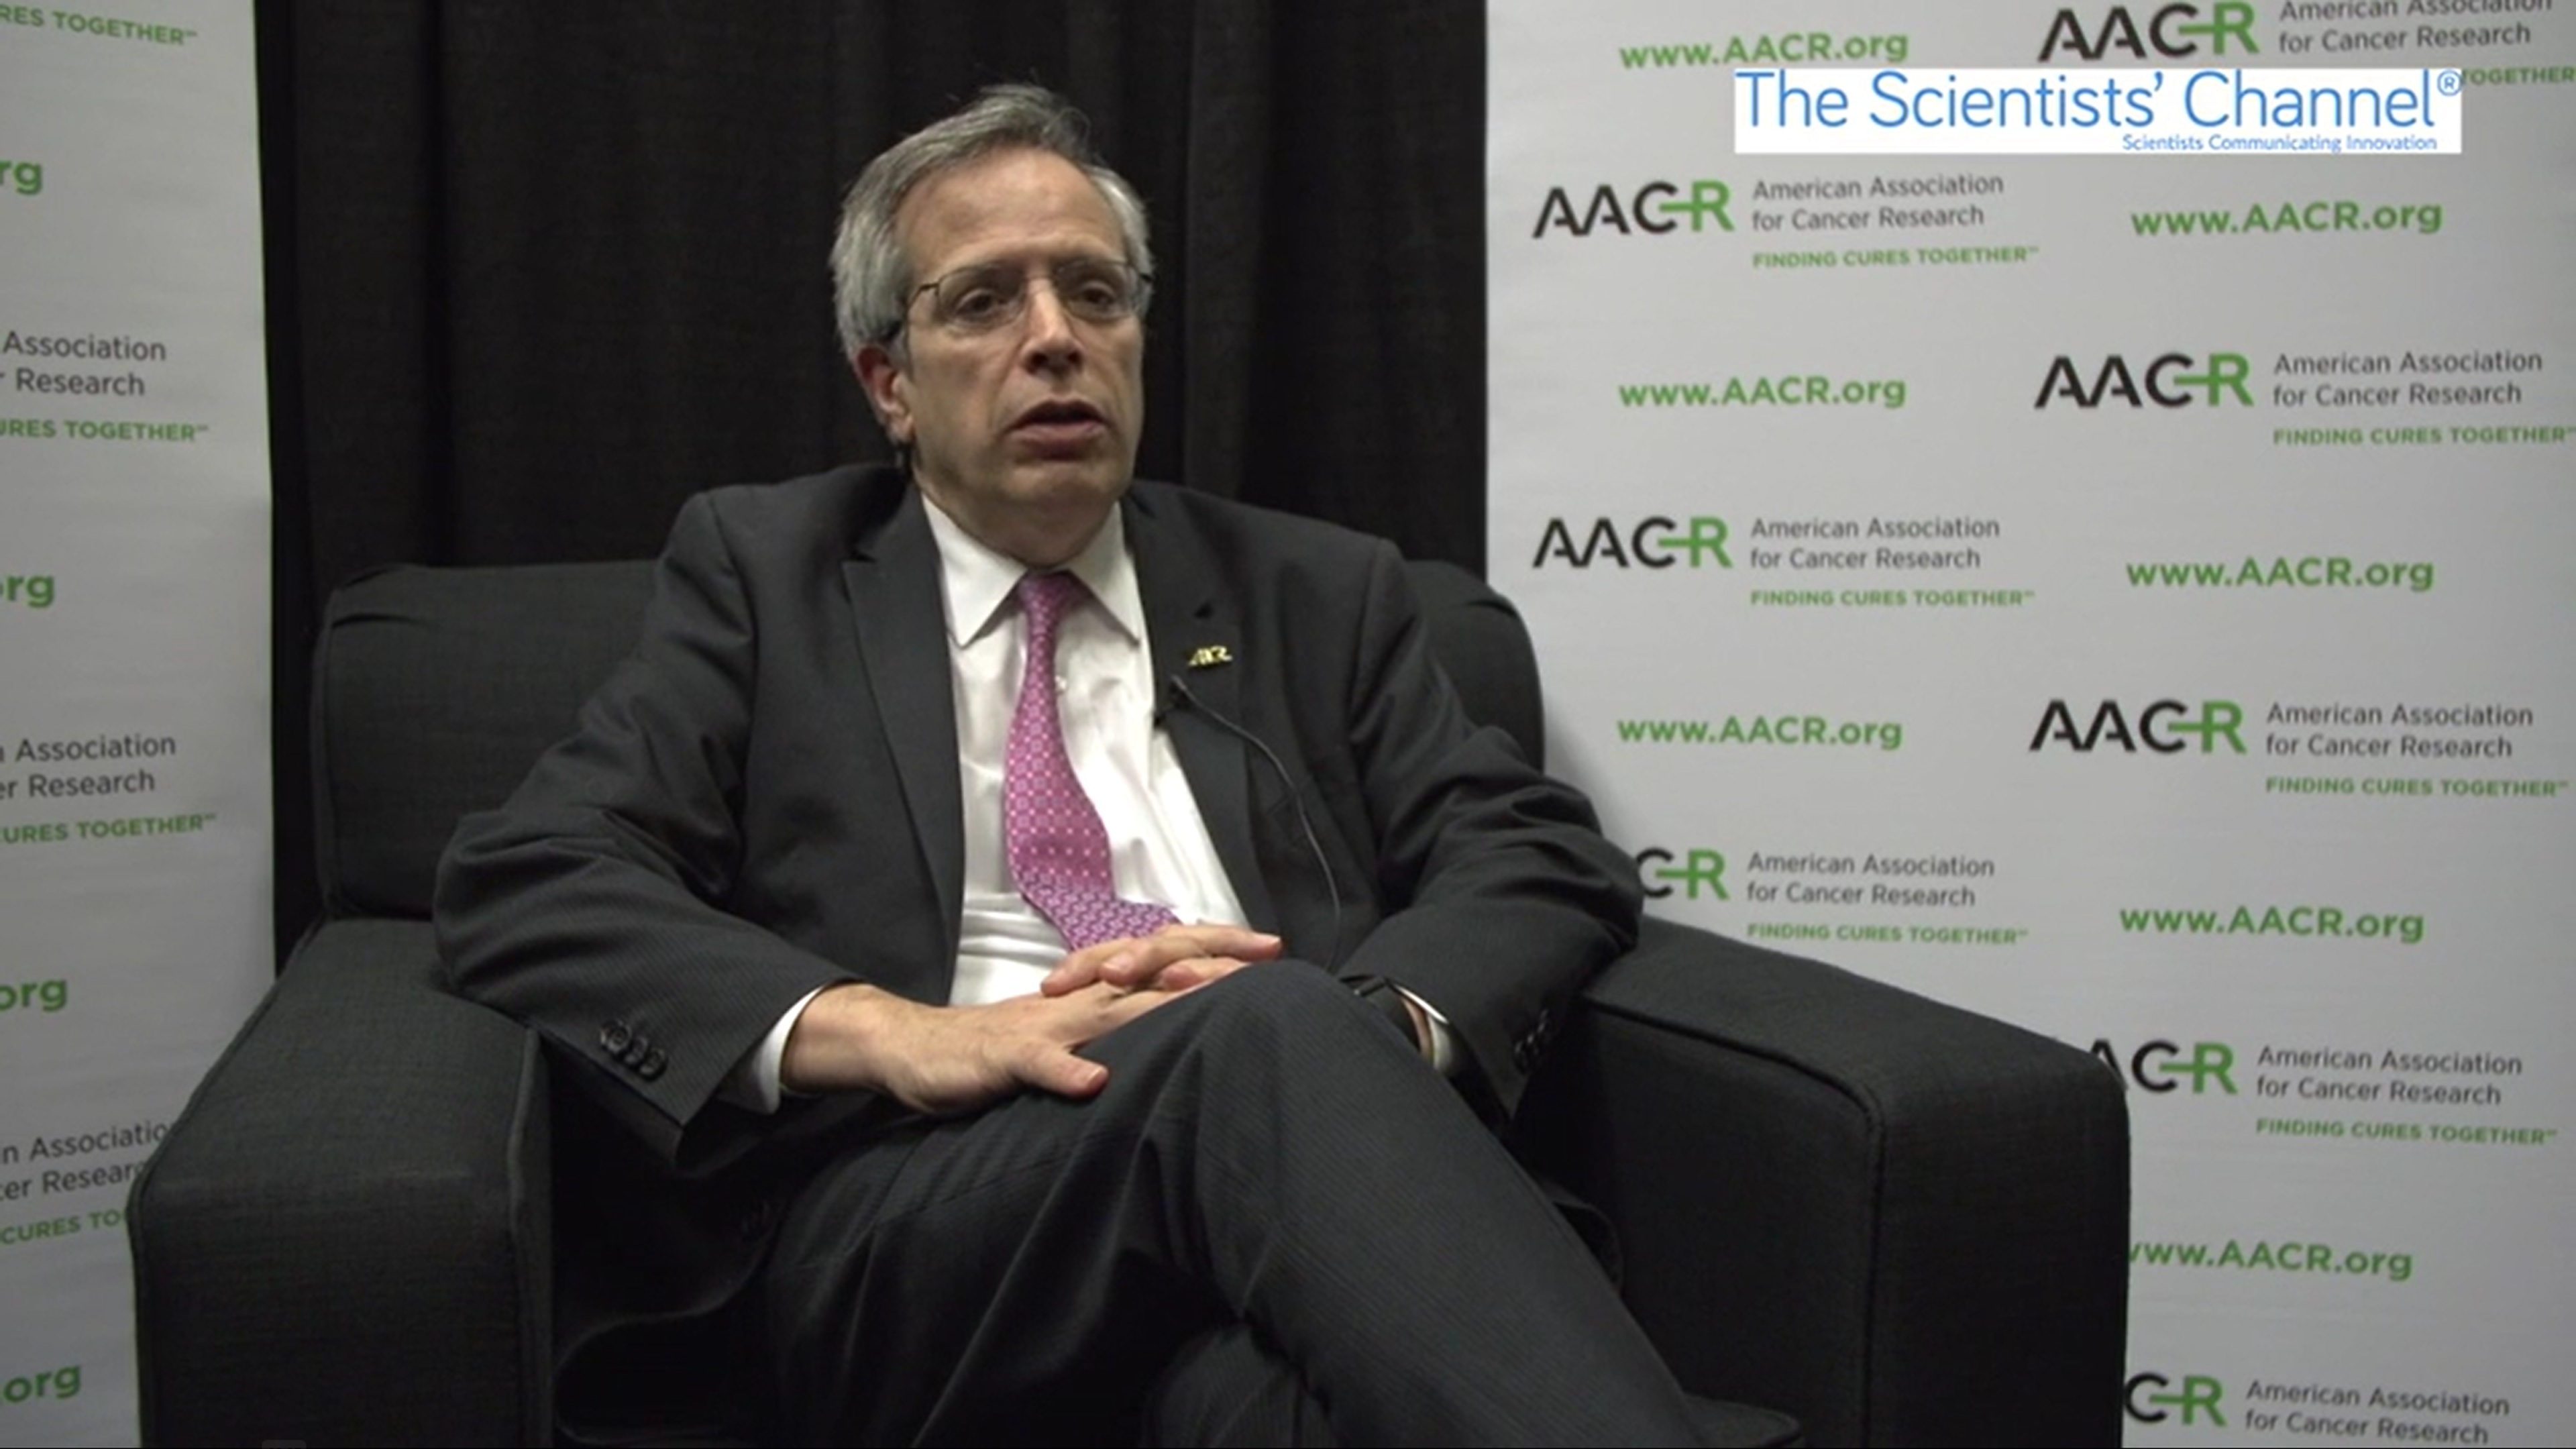 AACR President on his Inspiration, his Legacy and Cancer Health Disparities